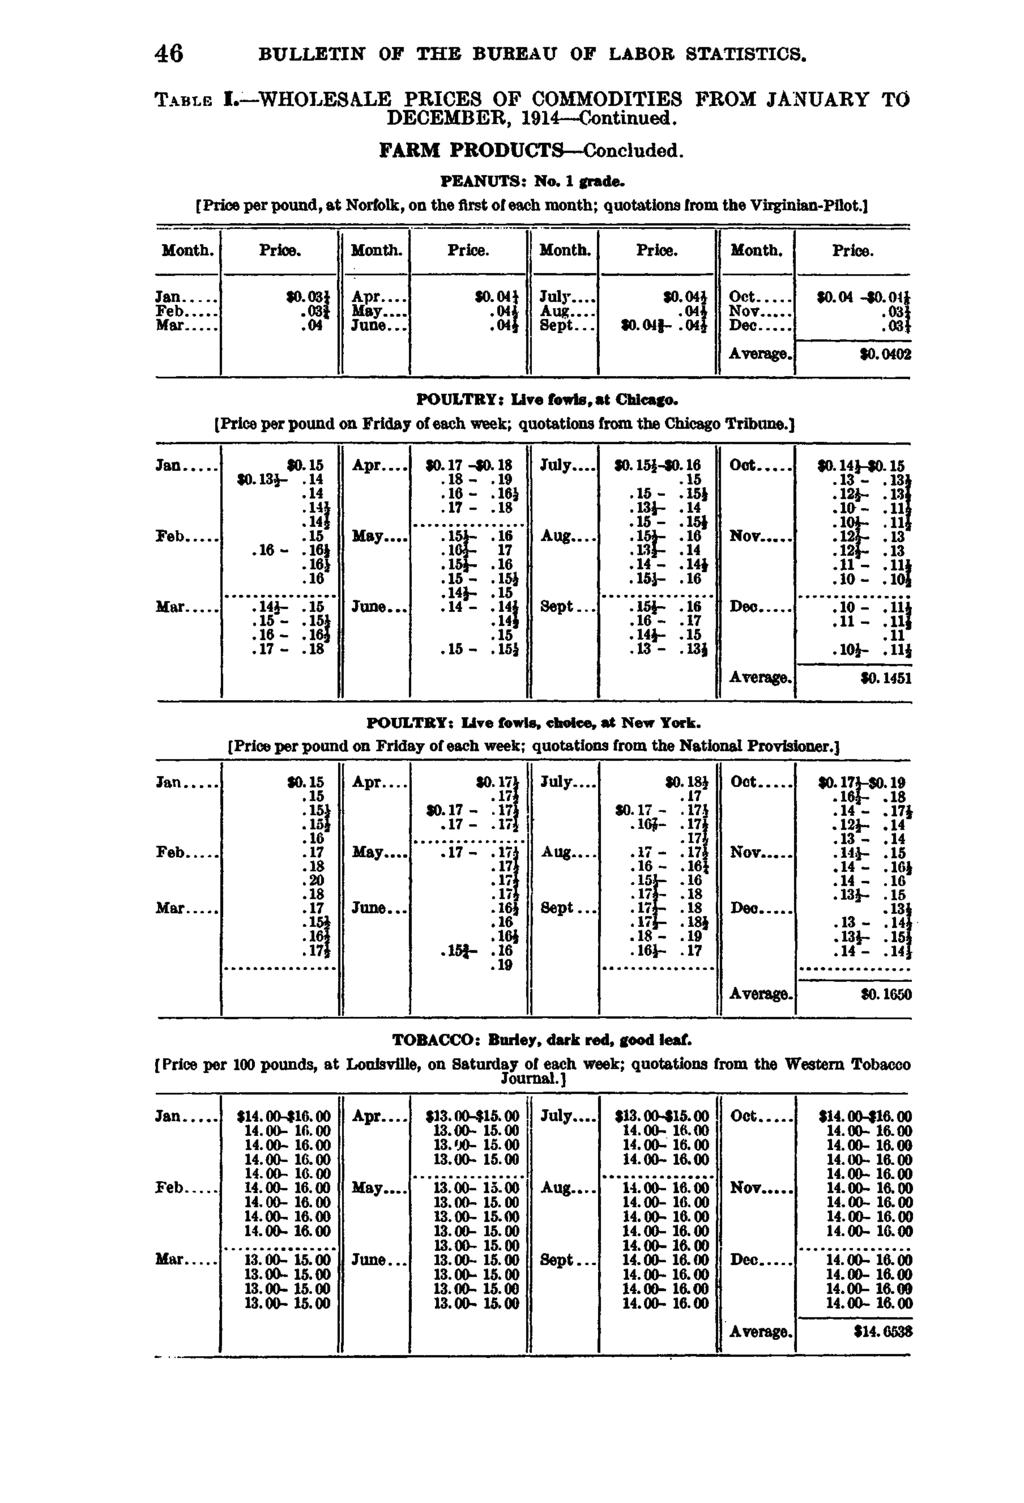 46 BULLETIN OF THE BUREAU OF LABOR STATISTICS. T a b l e I. WHOLESALE PRICES OF COMMODITIES FROM JANUARY TO DECEMBER, 1914 Continued. FARM PRODUCTS Concluded. PEANUTS: No. 1 grade.